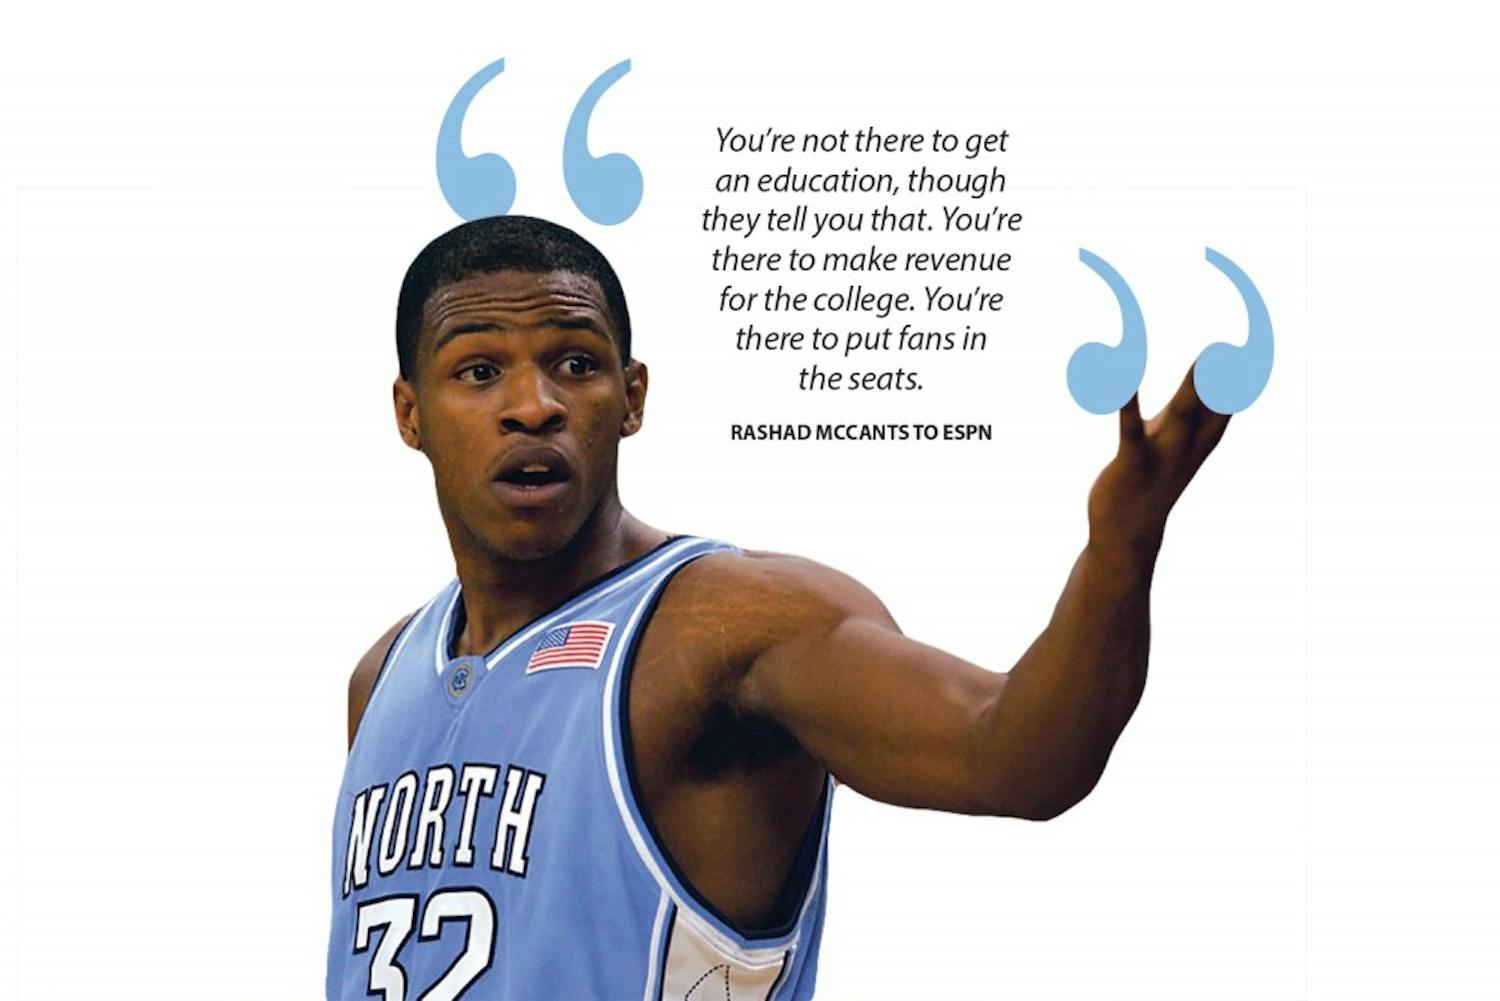 Last Friday, Rashad McCants — former UNC basketball player and a member of the 2005 national championship team — gave an interview with ESPN's "Outside the Lines" and discussed his academic experience at UNC.